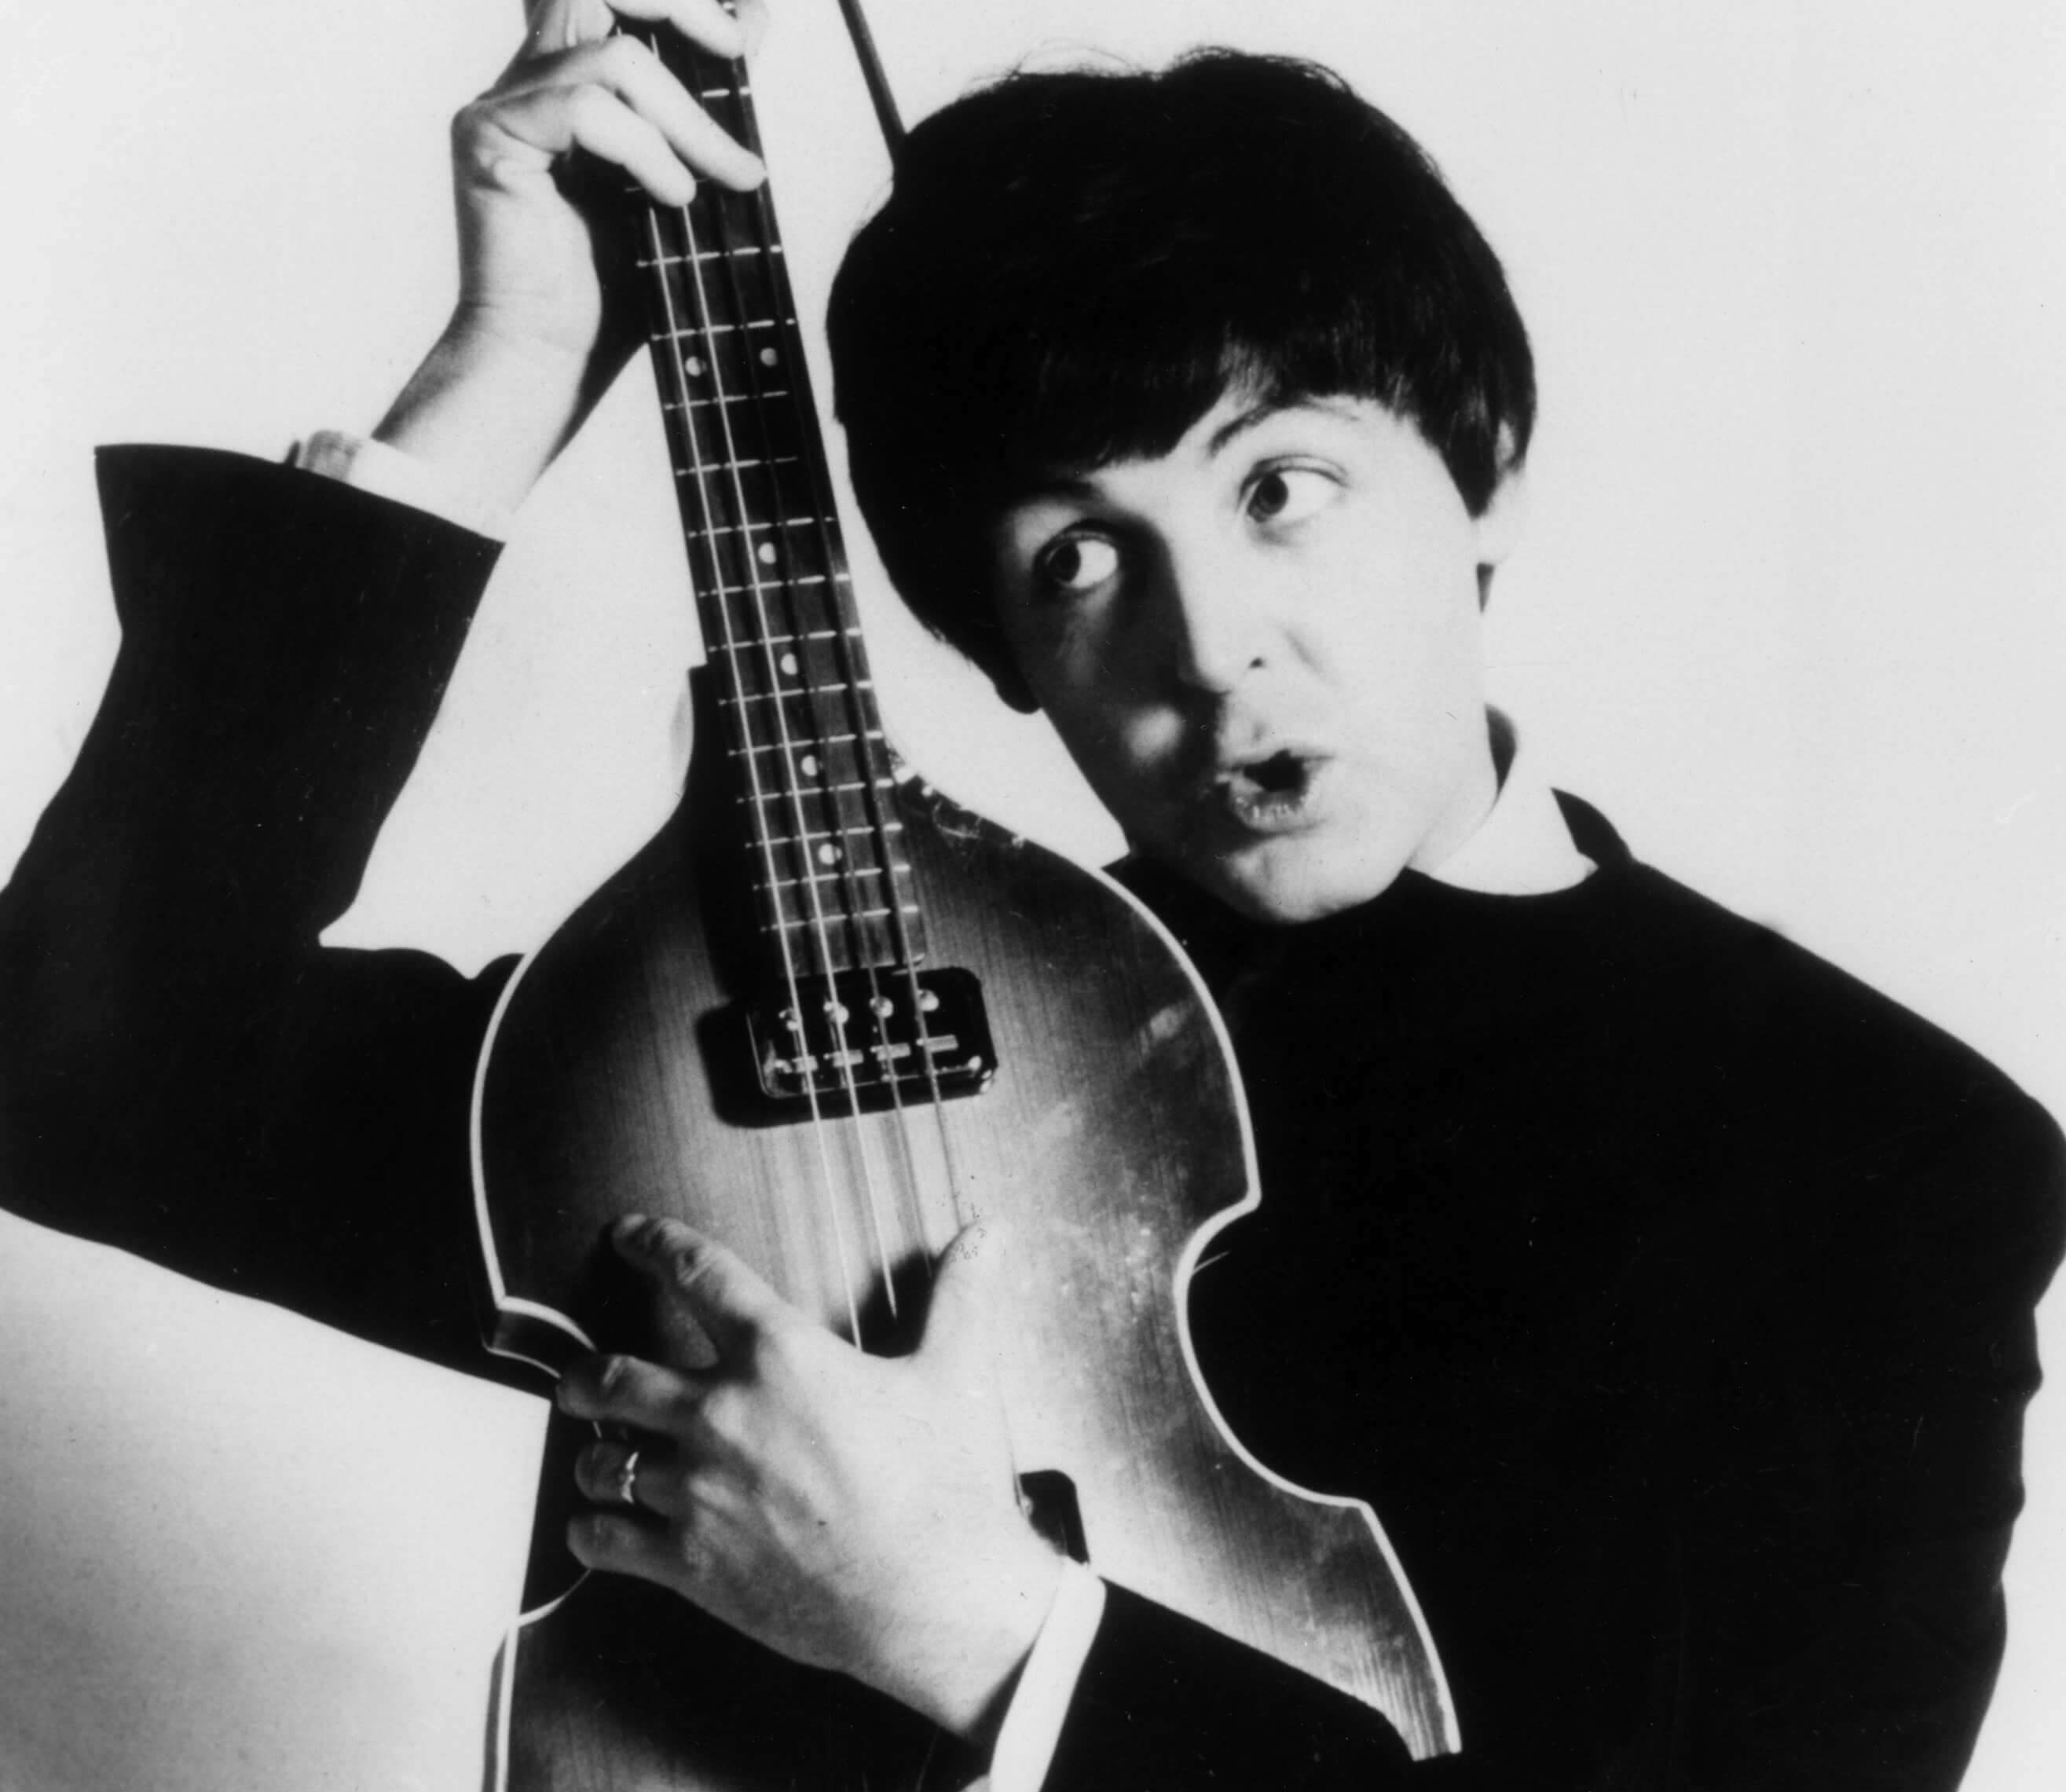 Paul McCartney with an instrument during The Beatles' "Yesterday" era